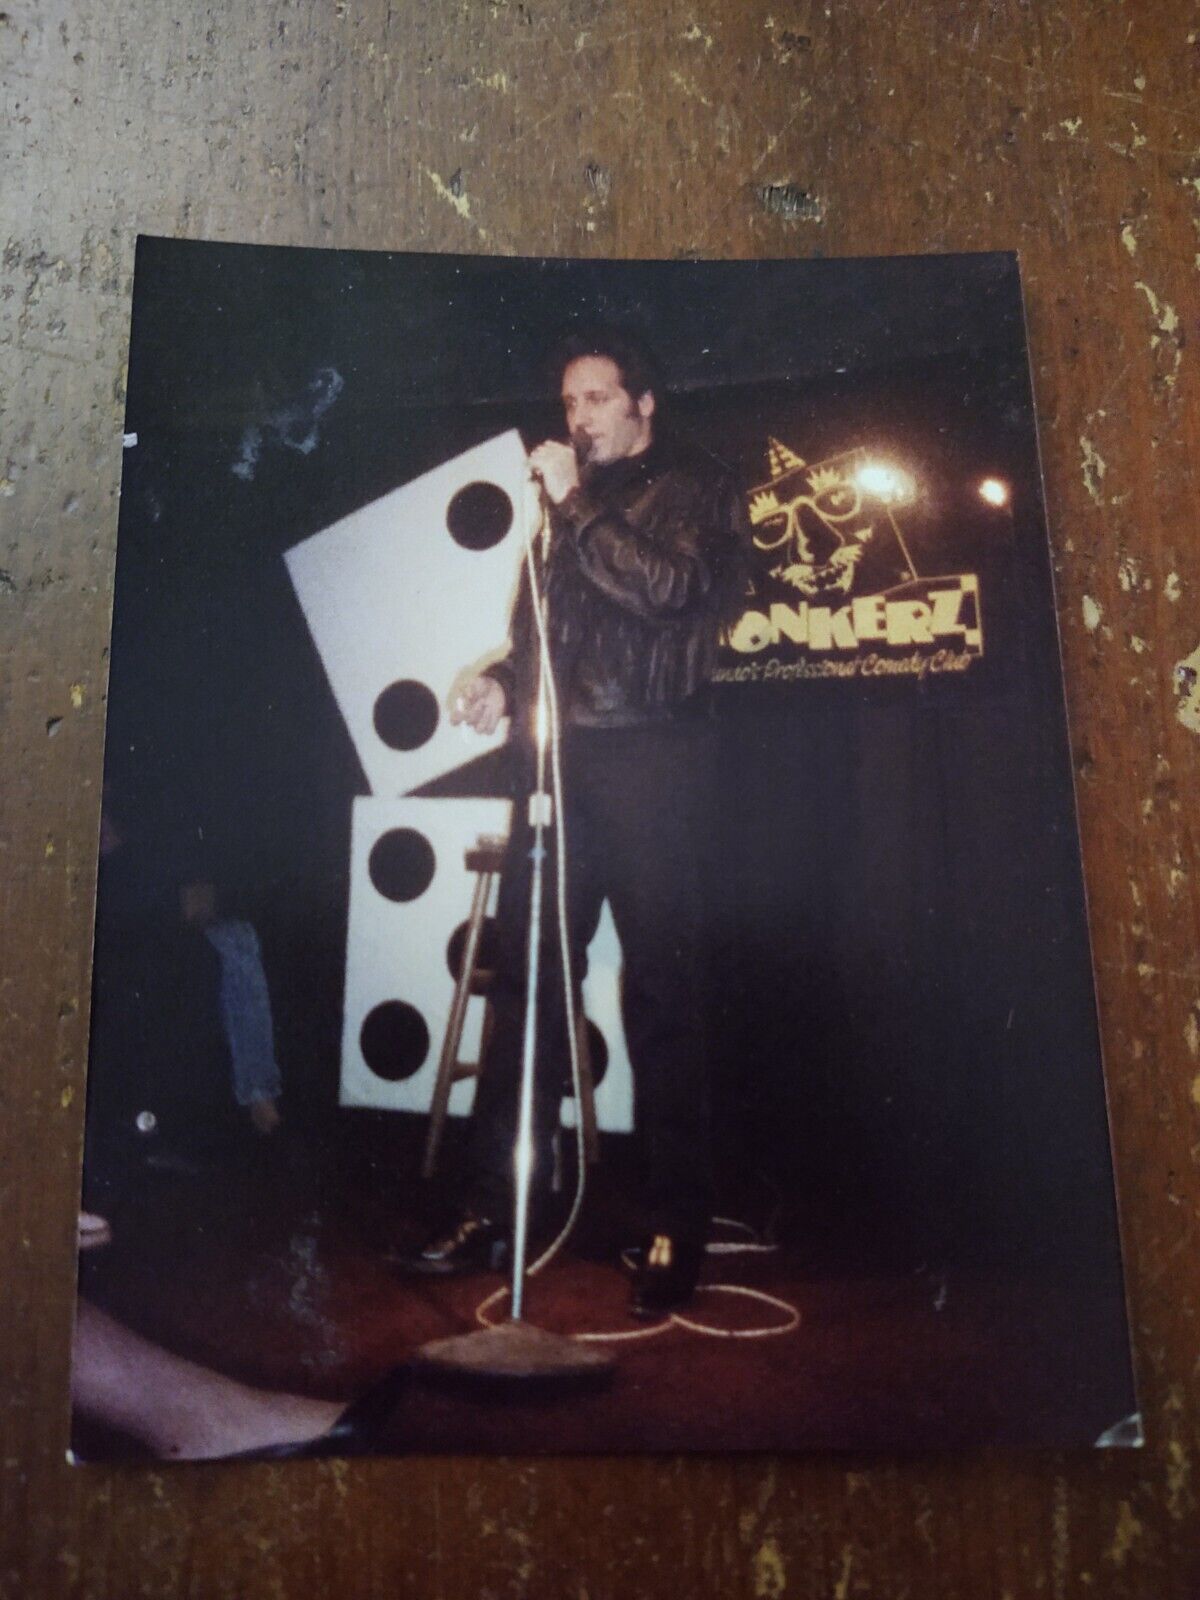 1989 VINTAGE ANDREW DICE CLAY CANDID PHOTOGRAPH PICTURE BONKERS COMEDY CLUB